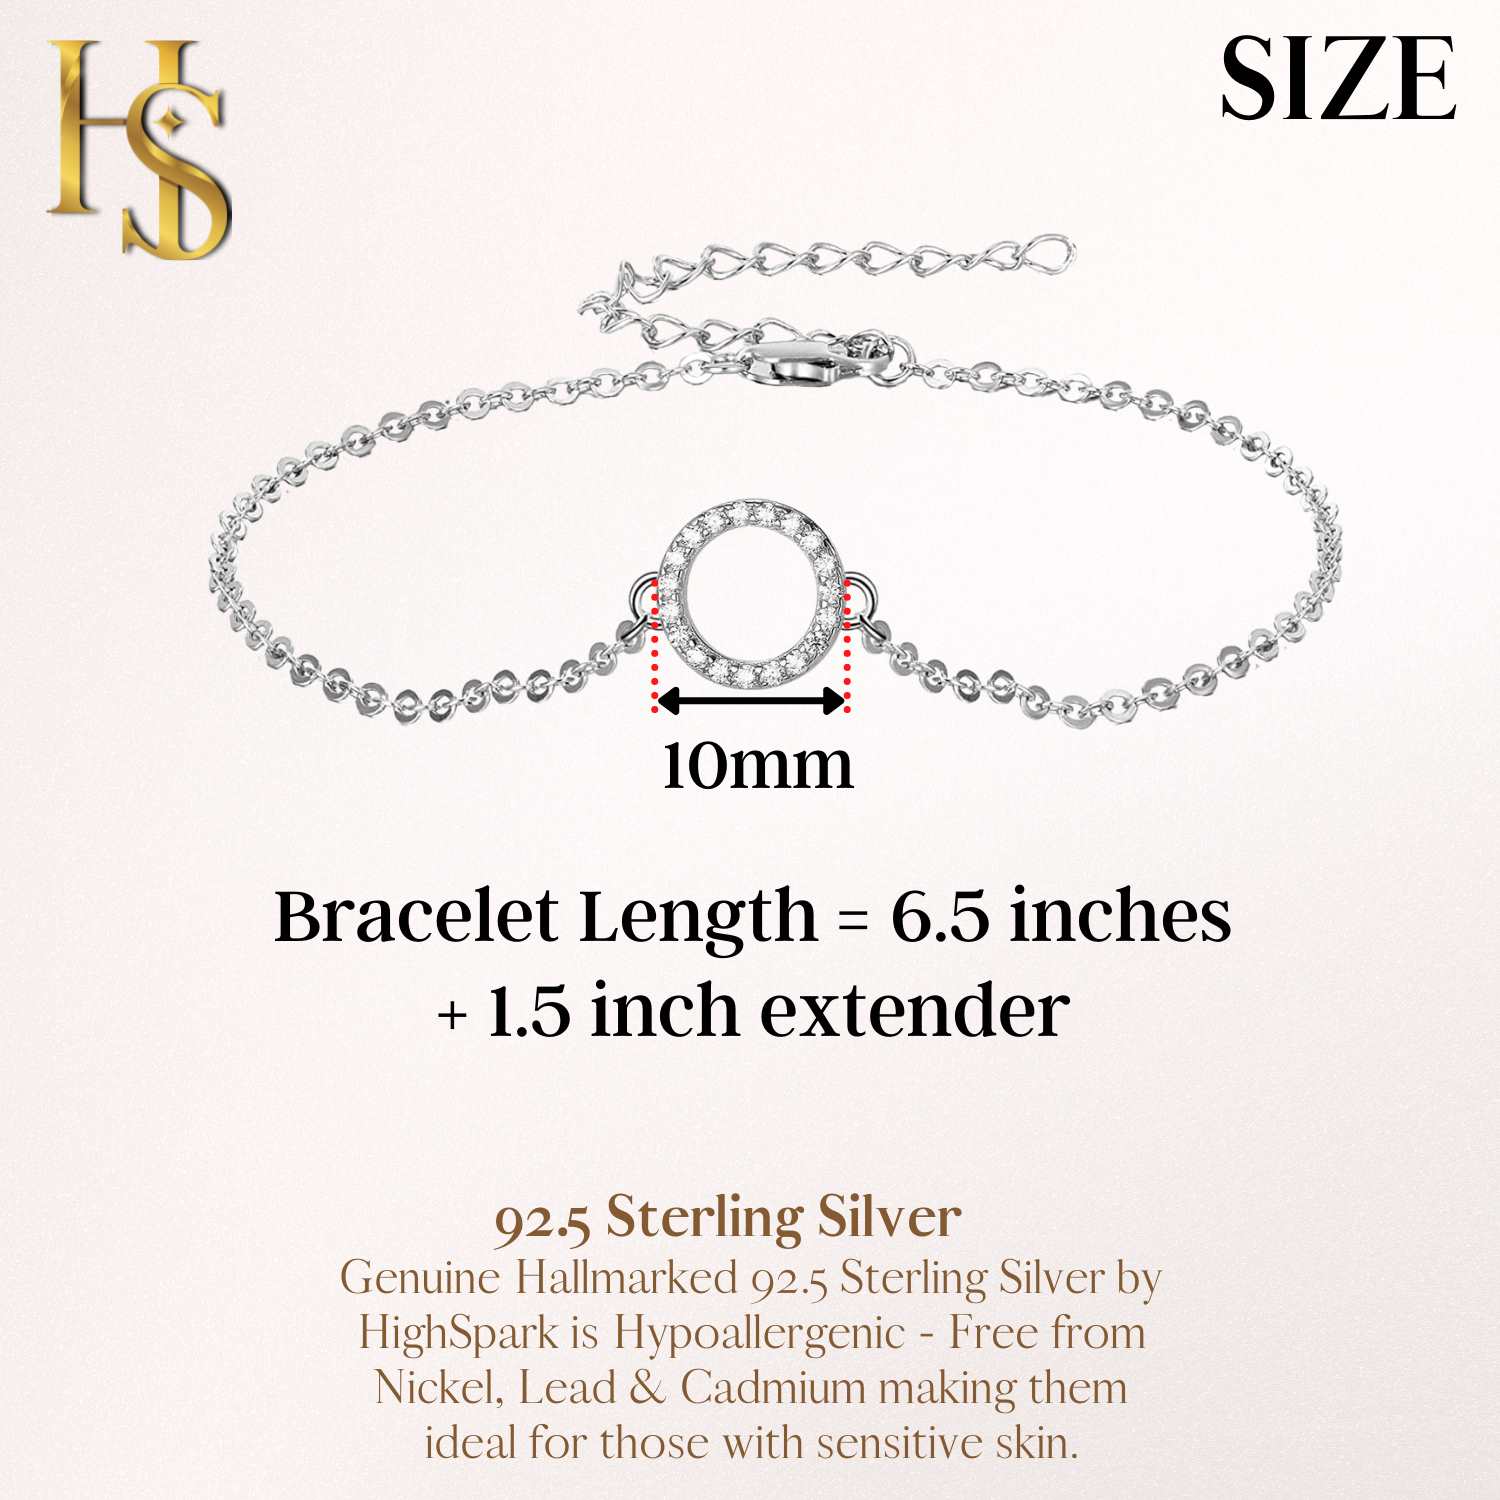 Circle Bracelet in 92.5 Silver studded with Swiss Zirconia - Circle of Life Celebrity Bracelet - Unity, Wholeness and Completeness